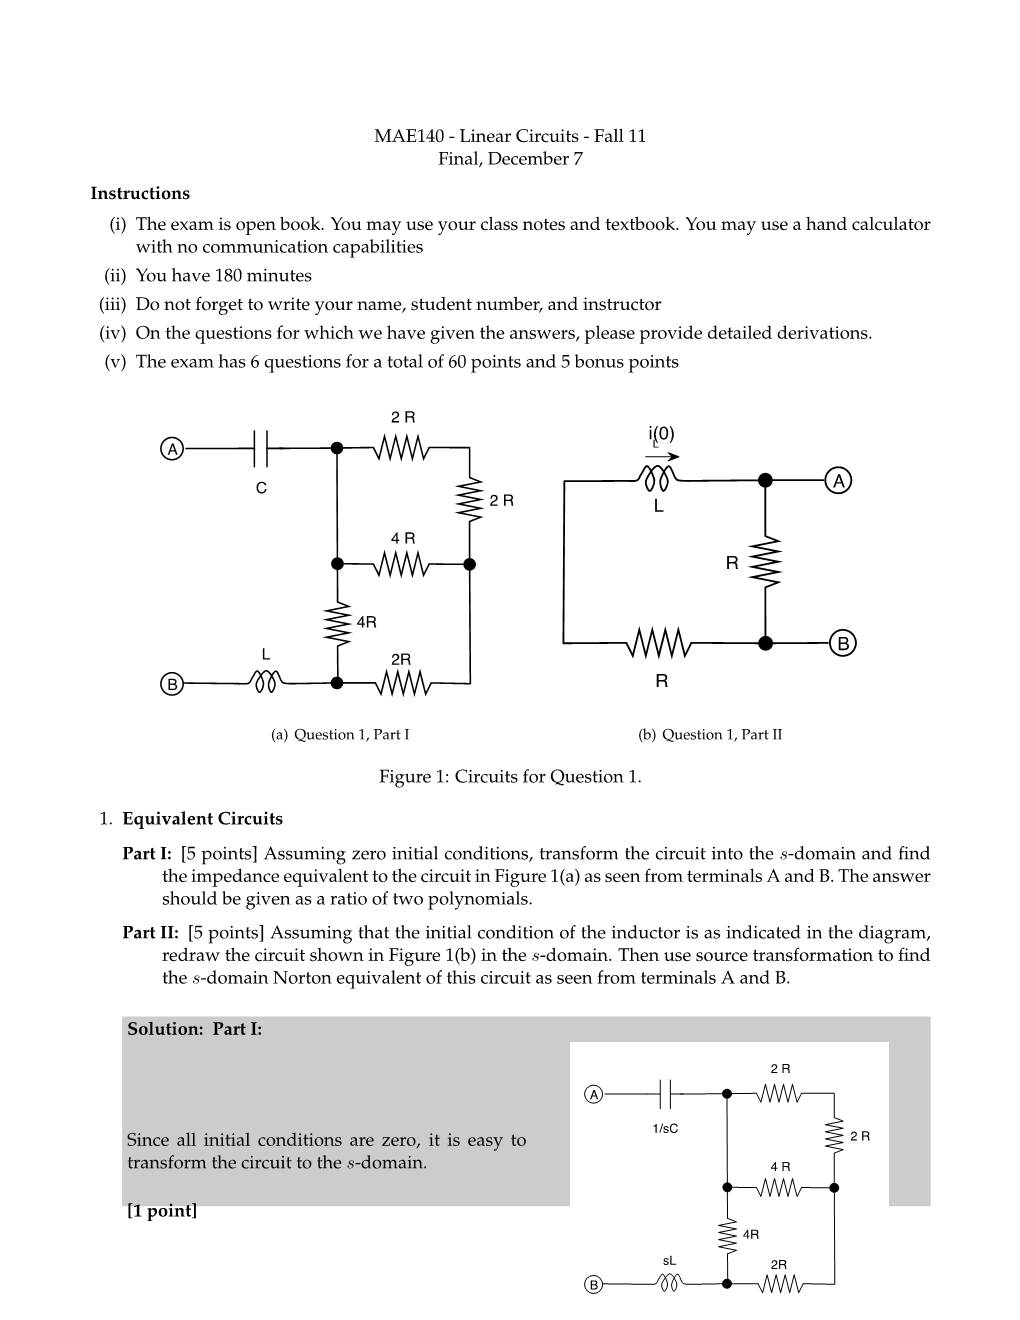 MAE140 - Linear Circuits - Fall 11 Final, December 7 Instructions (I) the Exam Is Open Book